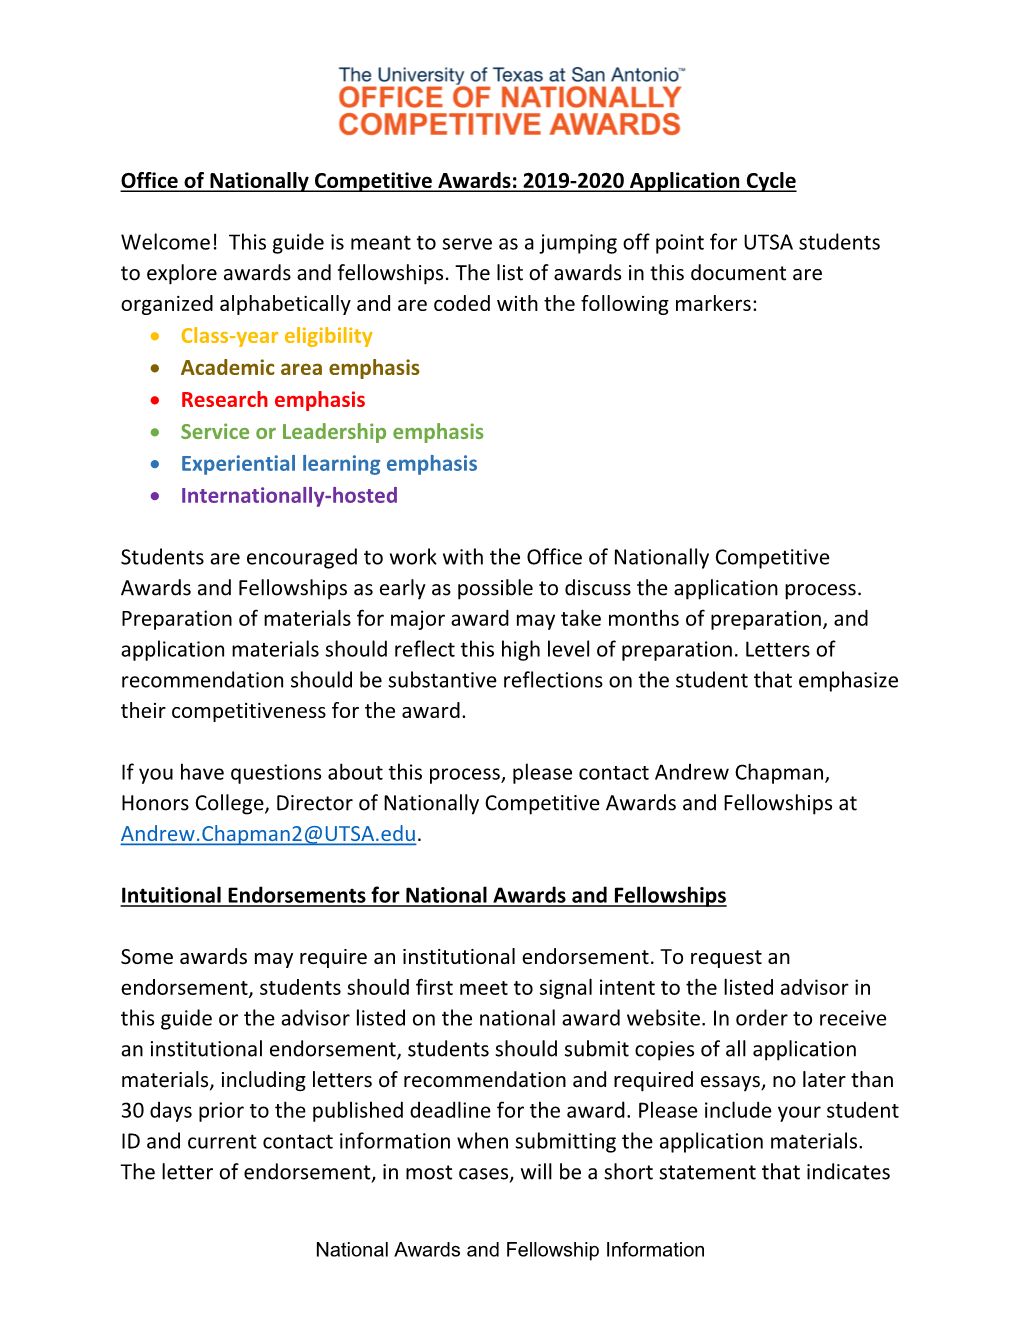 Office of Nationally Competitive Awards: 2019-2020 Application Cycle